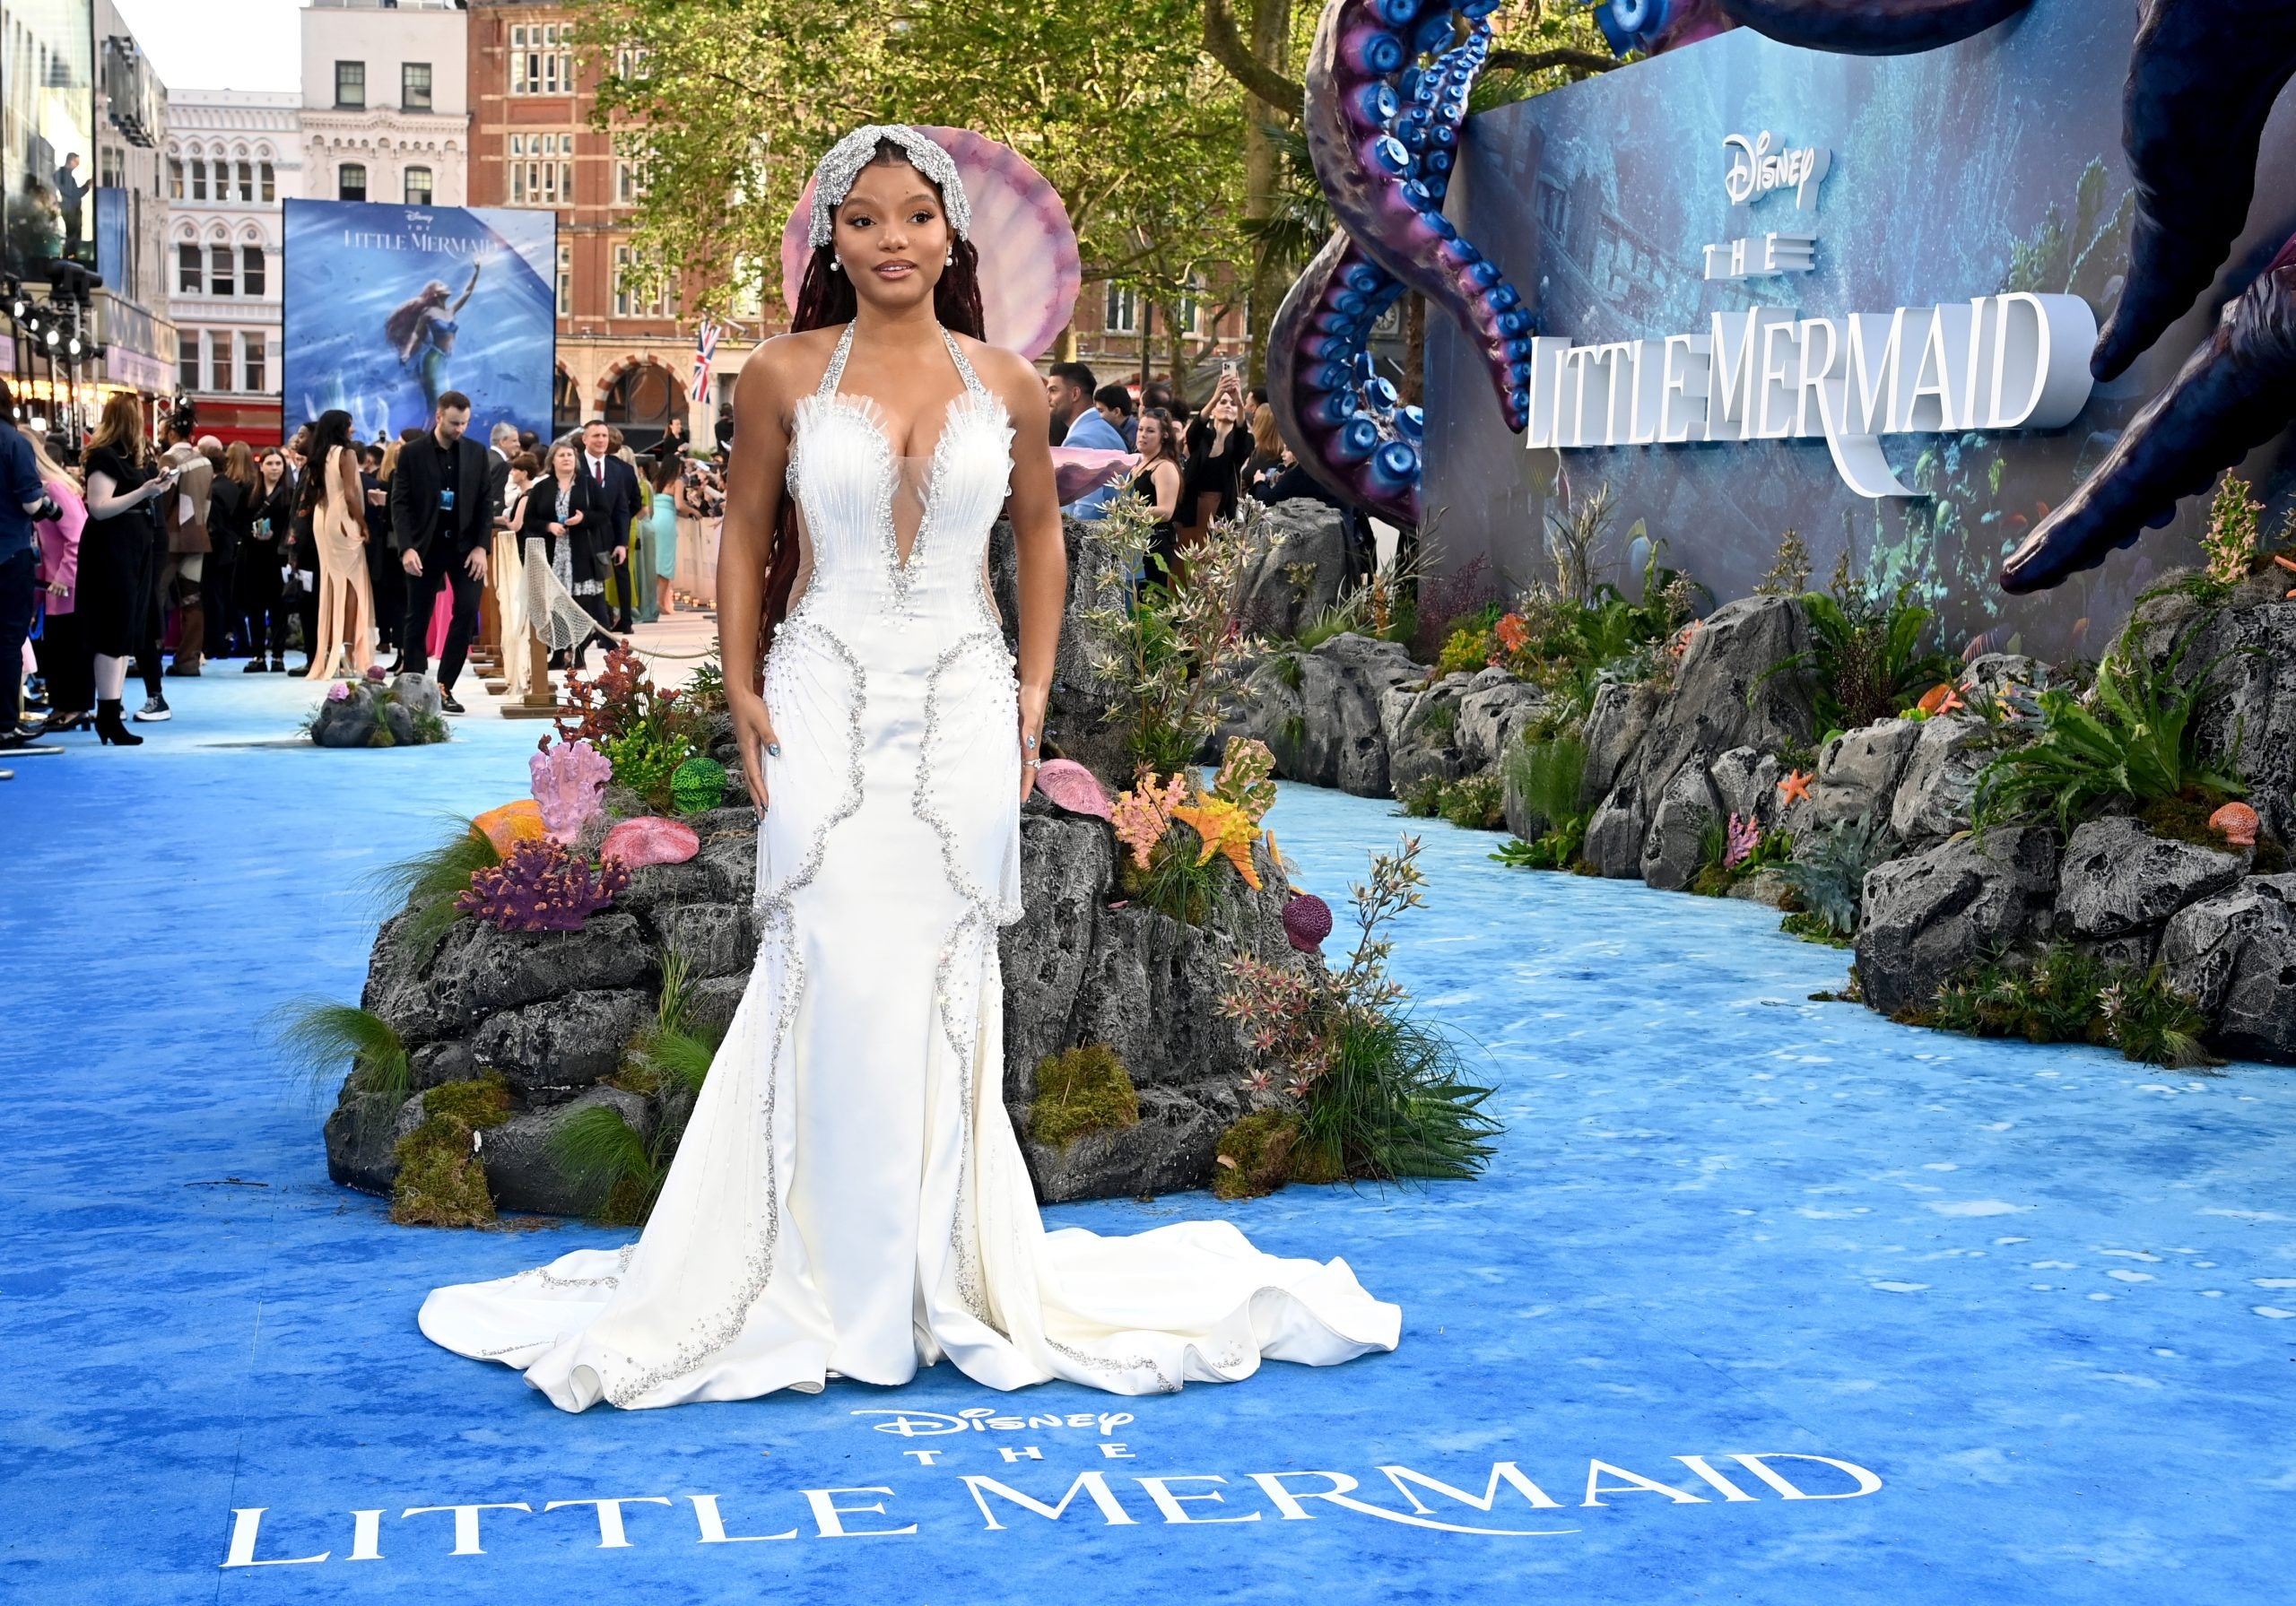 EXCLUSIVE: How Halle Bailey Got Cast As The New Ariel In Disney’s ‘The Little Mermaid’